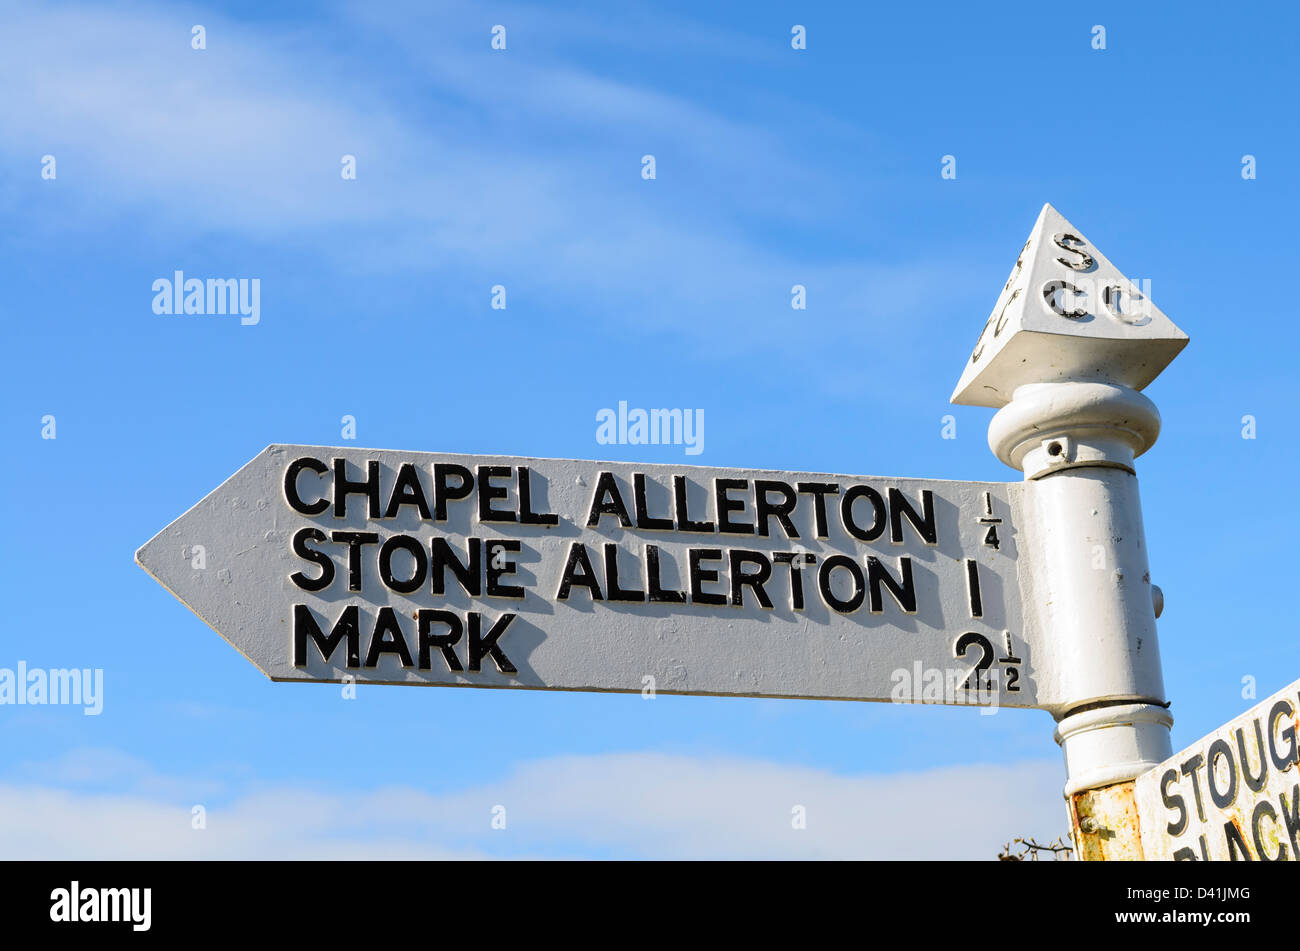 Old style road sign pointing to Chapel Allerton, Stone Allerton and Mark in Somerset, England. Stock Photo